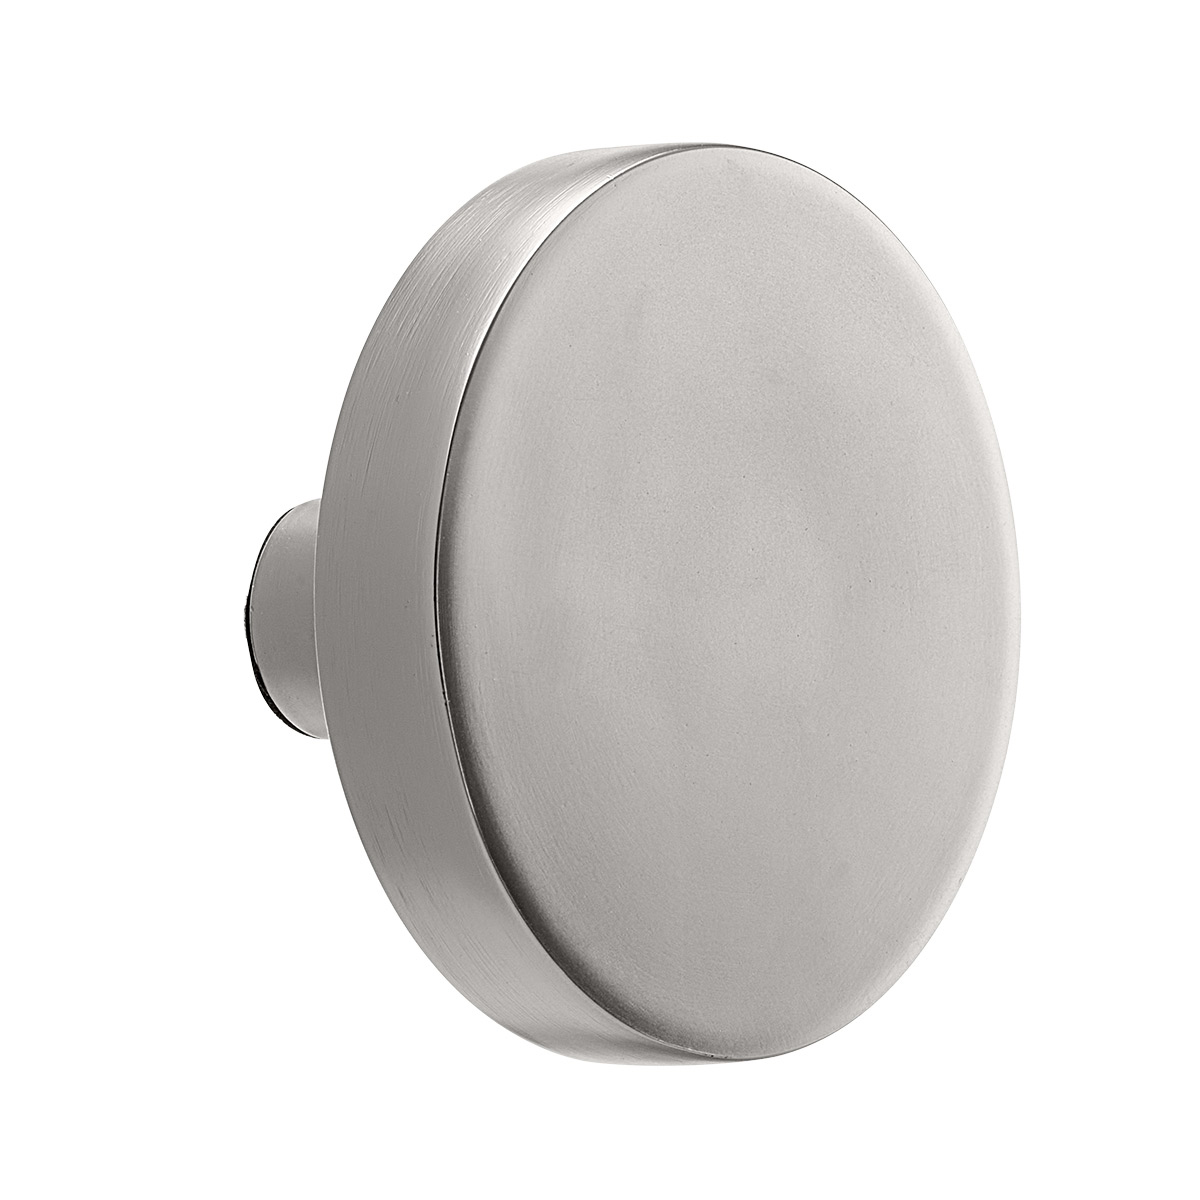 The Container Store Round Hook Brushed Nickel, 2-3/4 Diam. x 1-5/8 H